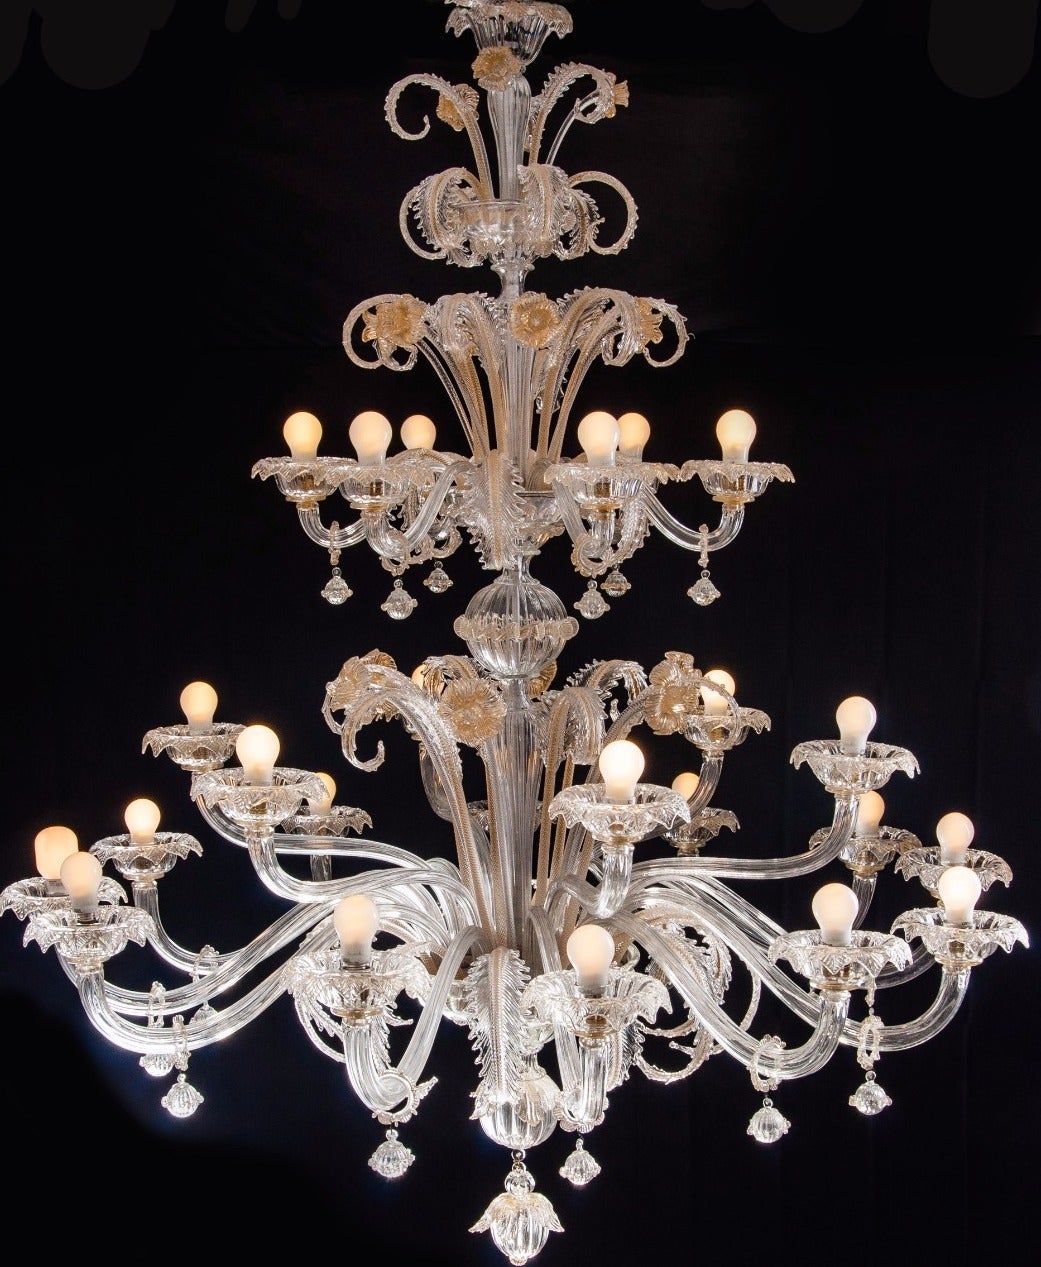 Spectacular Murano chandelier. The arms 24 are arranged on three floors. The glasses are embellished with gold inclusions in perfect condition.
 24 E 27 light bulbs or we can wire with E 14 candles.
Provenance from a Roman Historic Palace.
 
Cleaned